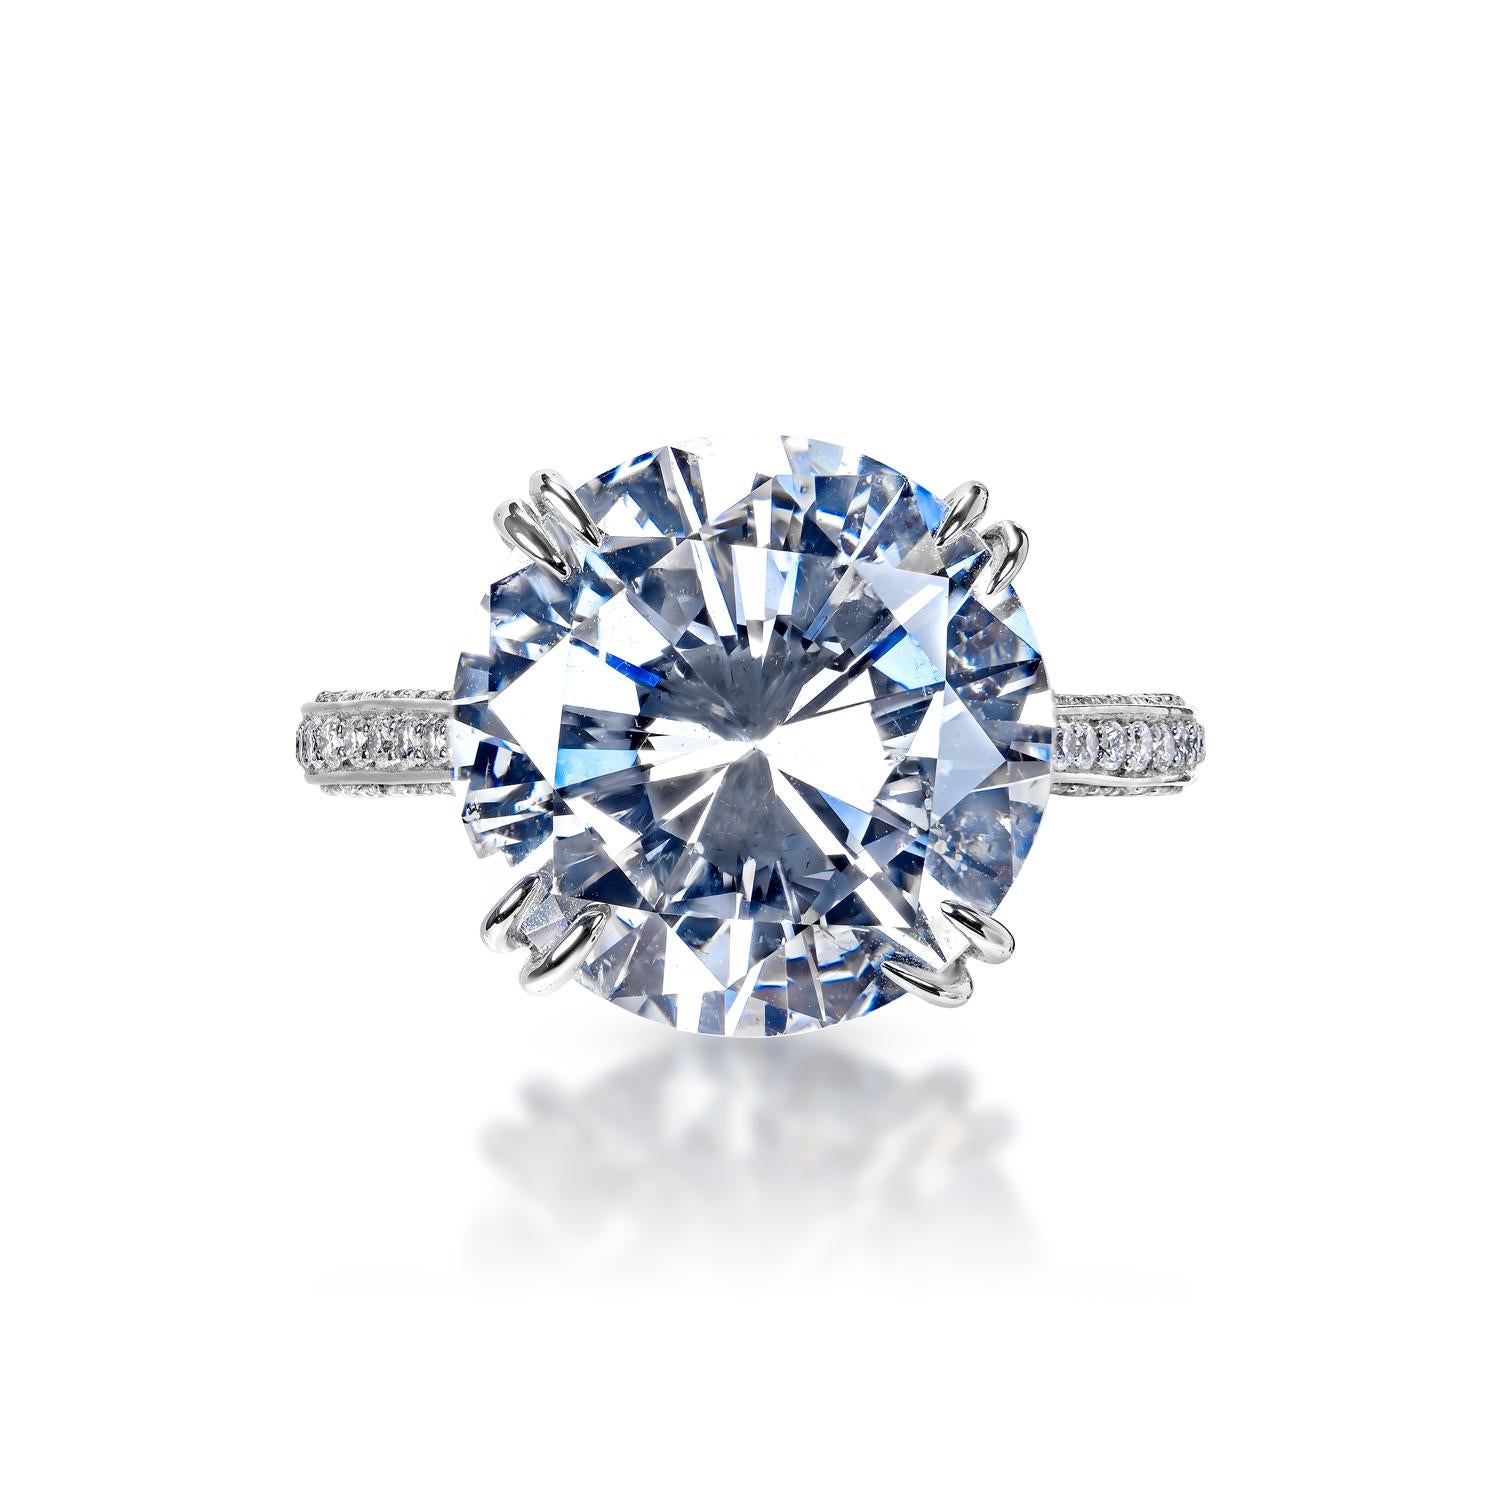 Earth Mined Center Diamond:
Carat Weight: 7.29 Carats
Color: E
Clarity: VS2
Style: Round Brilliant Cut

Carat Weight: 0.54 Carats
Shape: Round Brilliant Cut
Setting: 4 double prong & Micro Pave
Metal: 18 karat White Gold

Total Carat Weight: 7.83